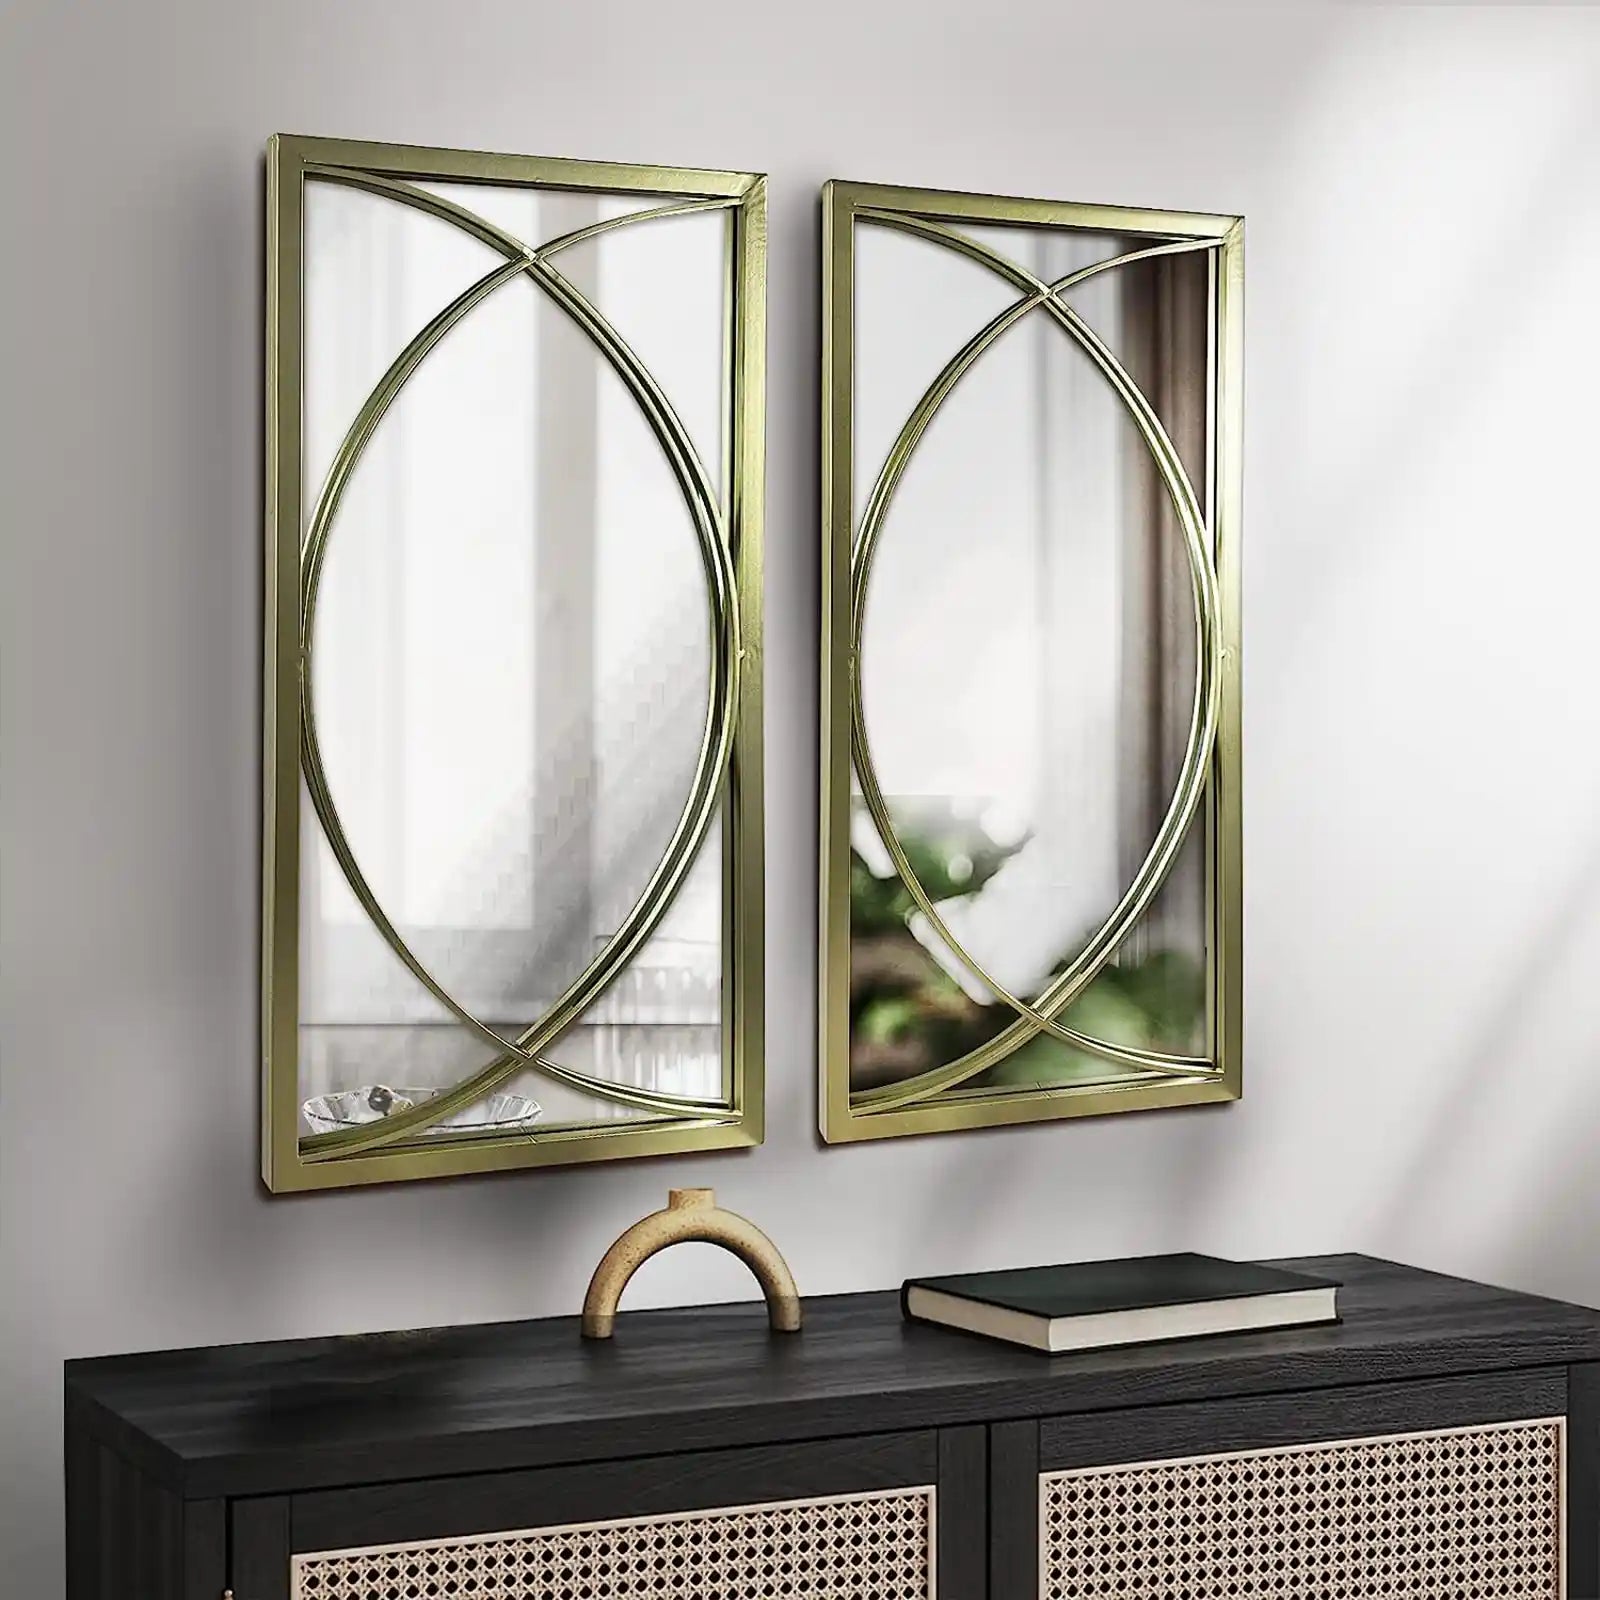 Gold Rectangle Wall Mirror with Metal Frame,Decorative Wall Mirror Set,Hanging Mirrors for Living Room Bedroom Bathroom Entryway,Pack of 2